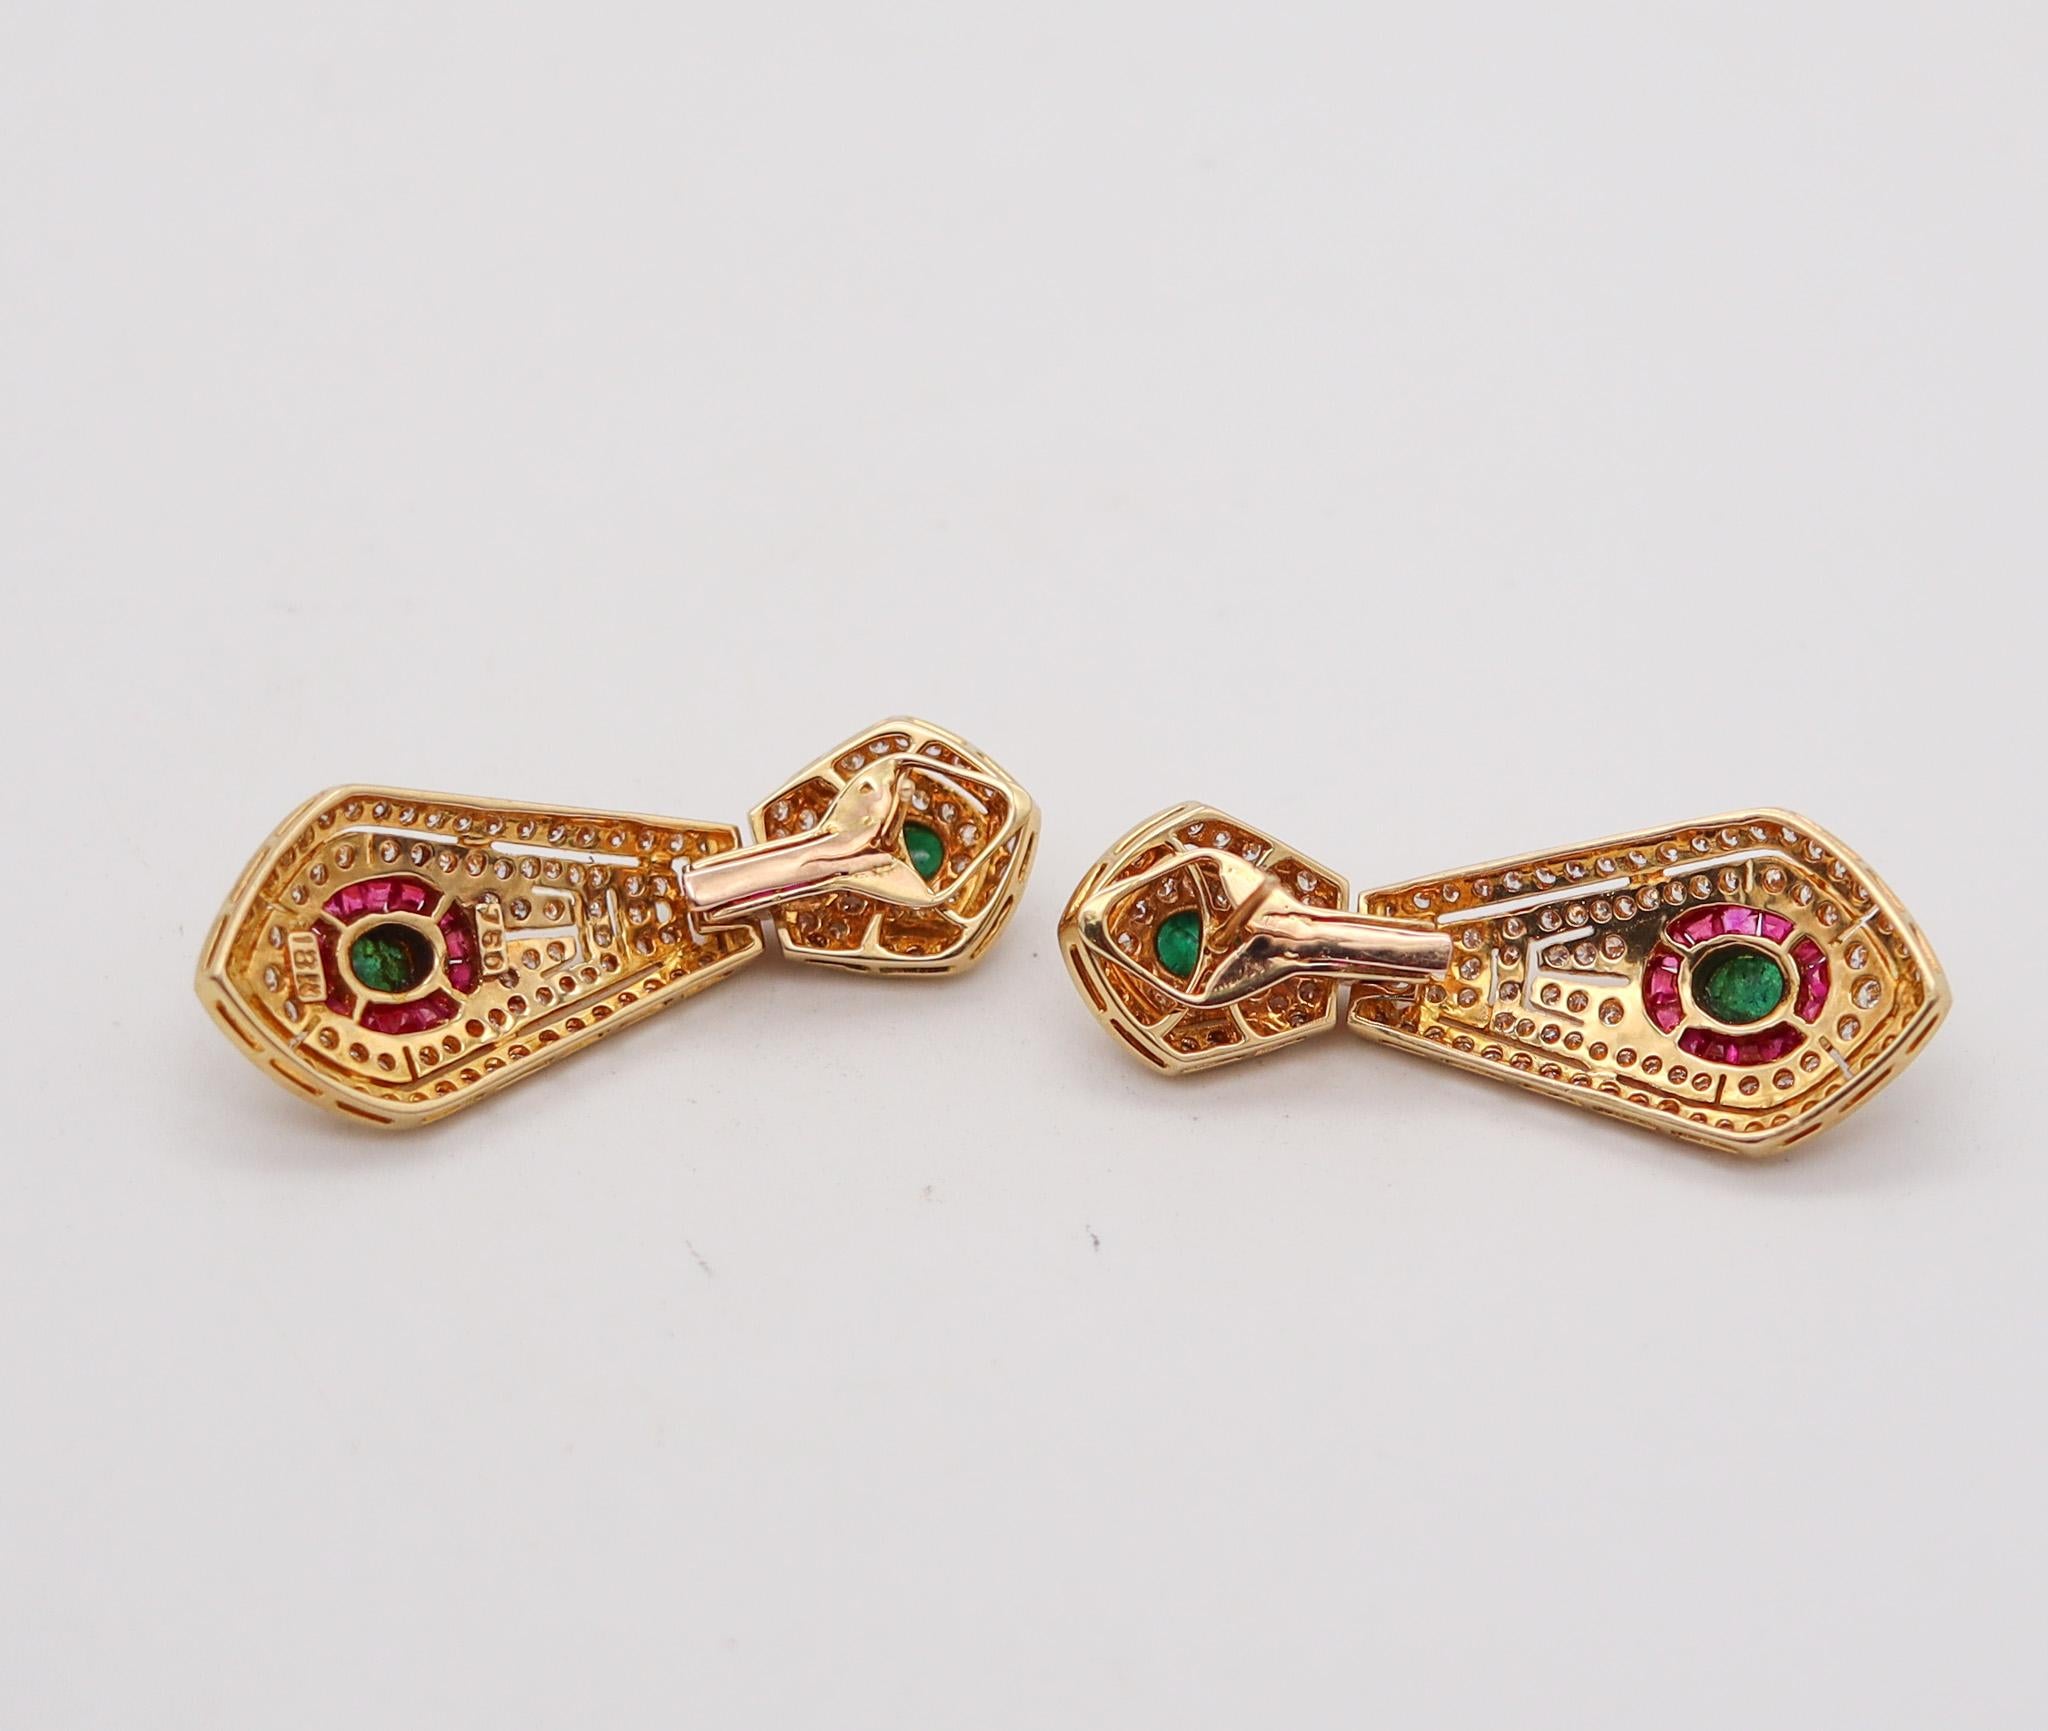 Women's Dangle Drop Earrings In 18Kt Gold With 7.92 Ctw In Diamonds Rubies And Emeralds For Sale